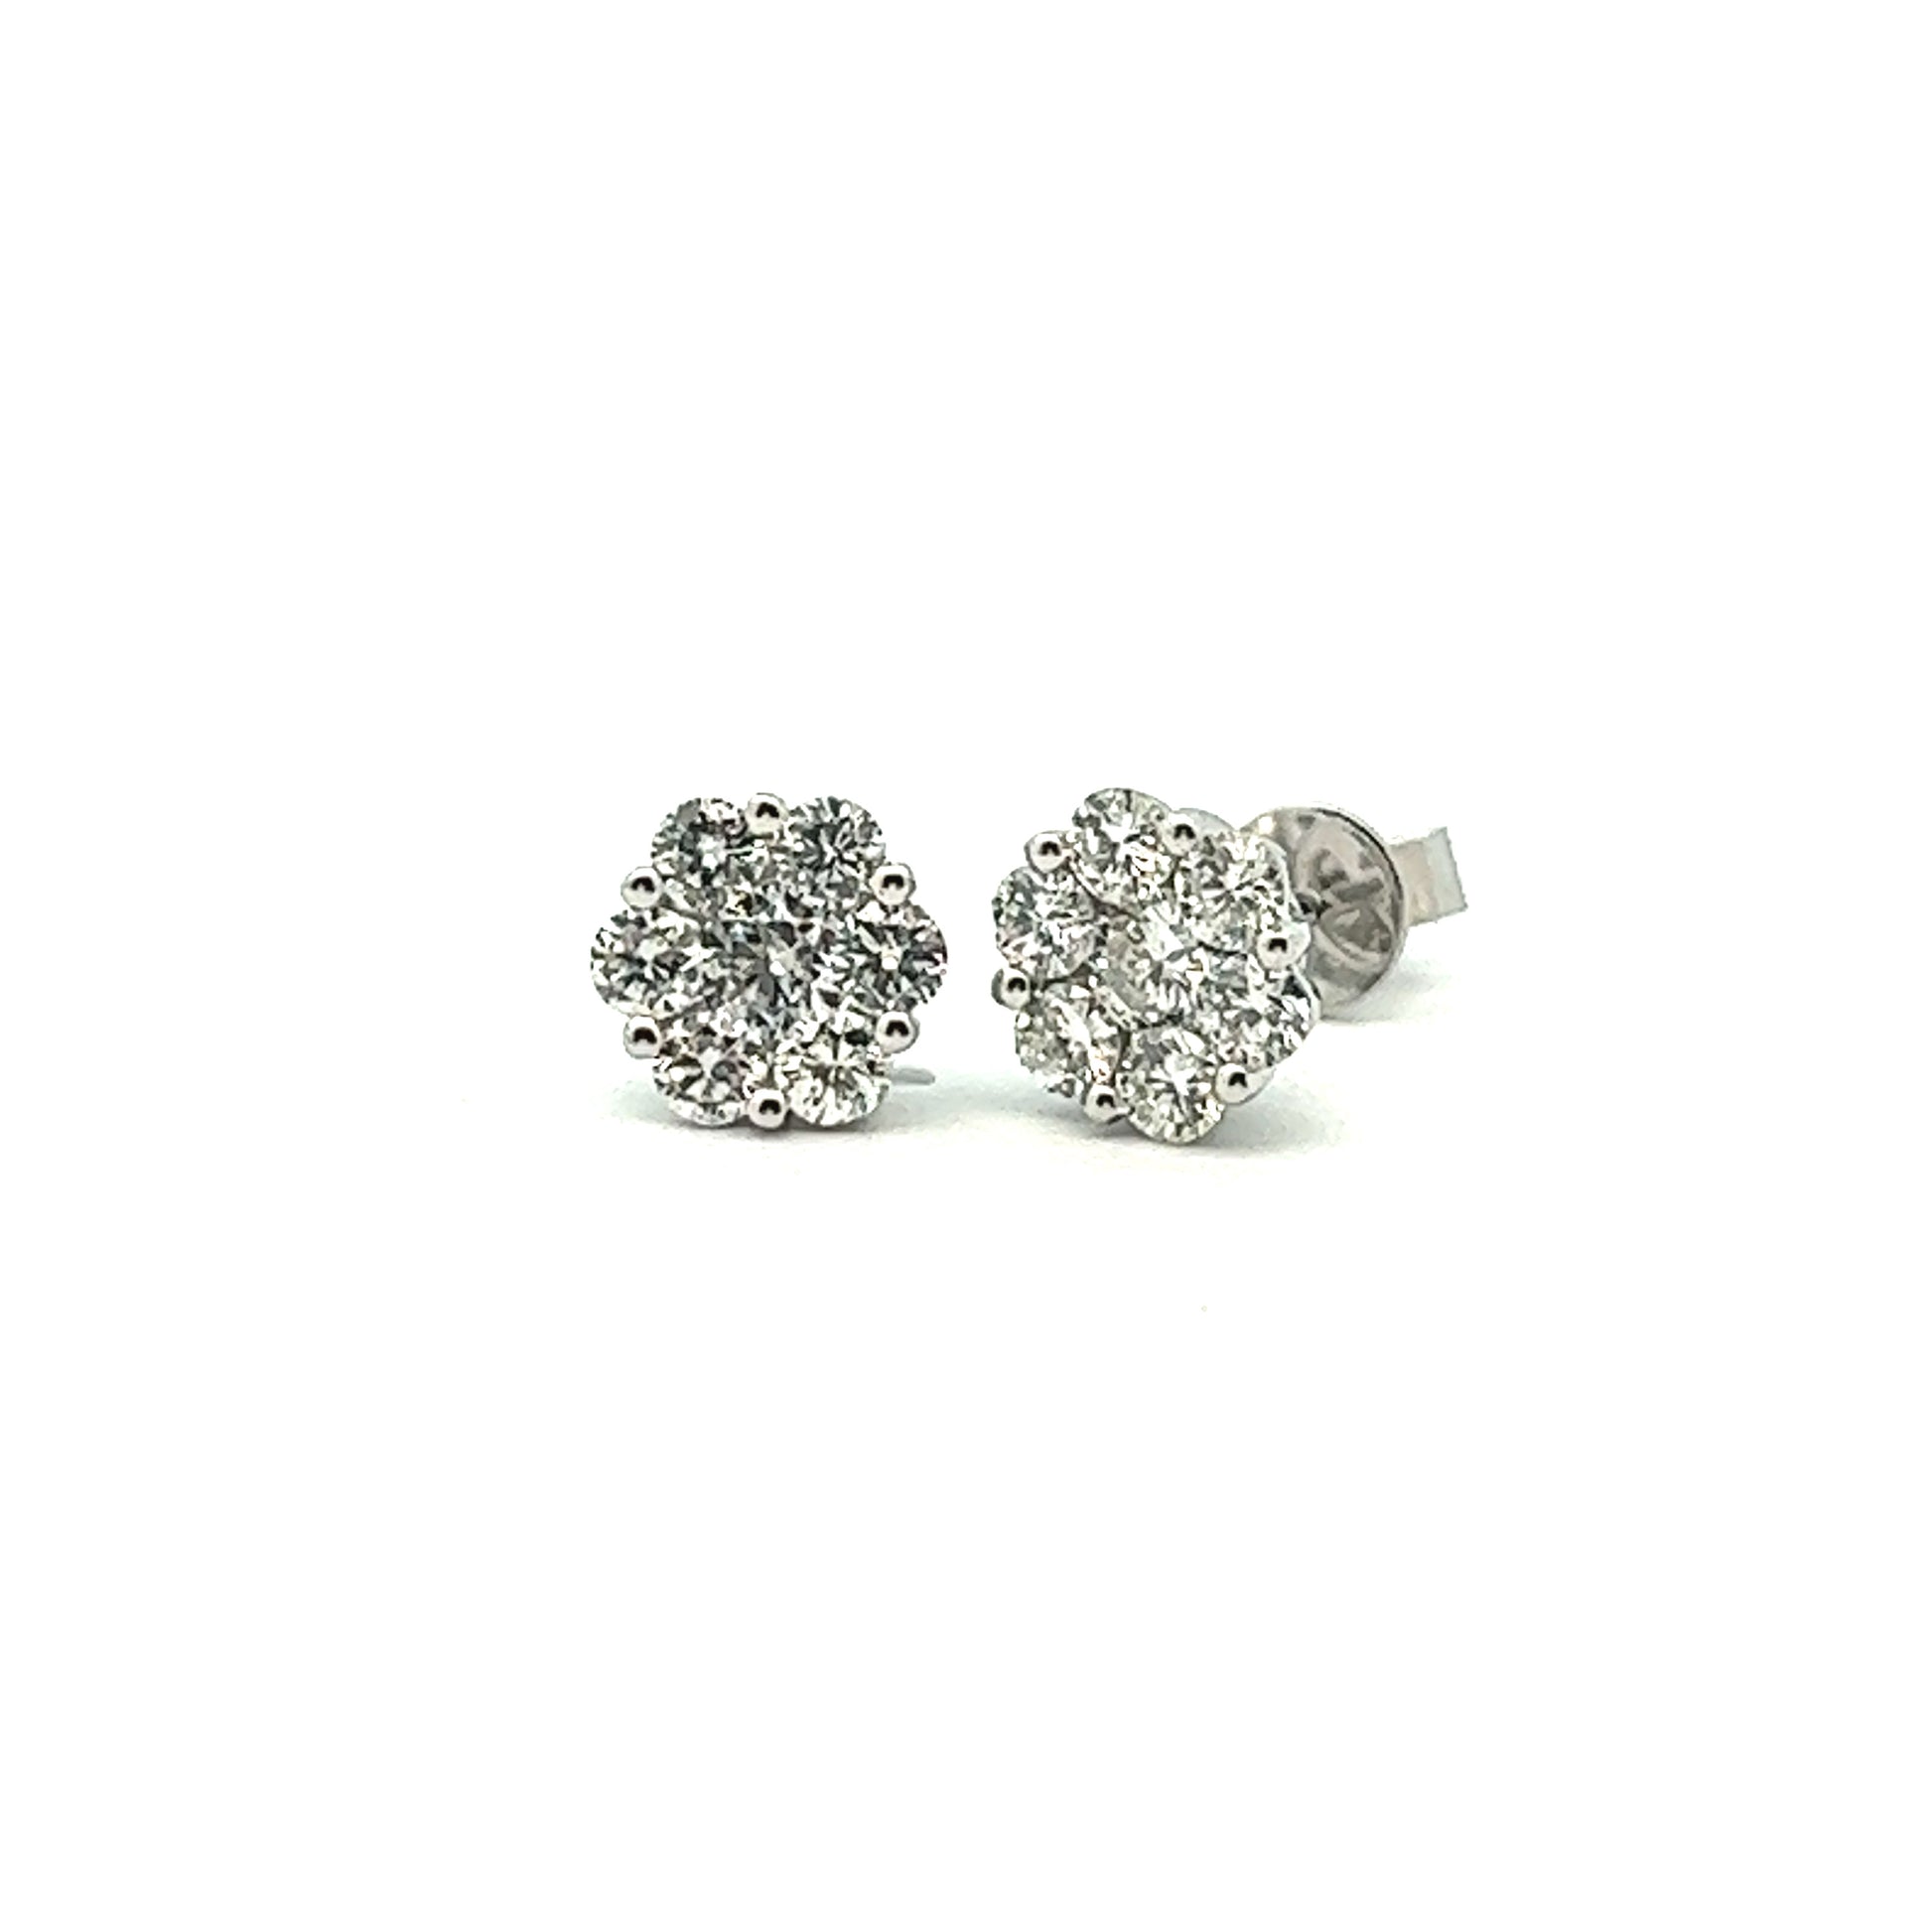 1.48ct Total Weight Diamond Cluster Earrings